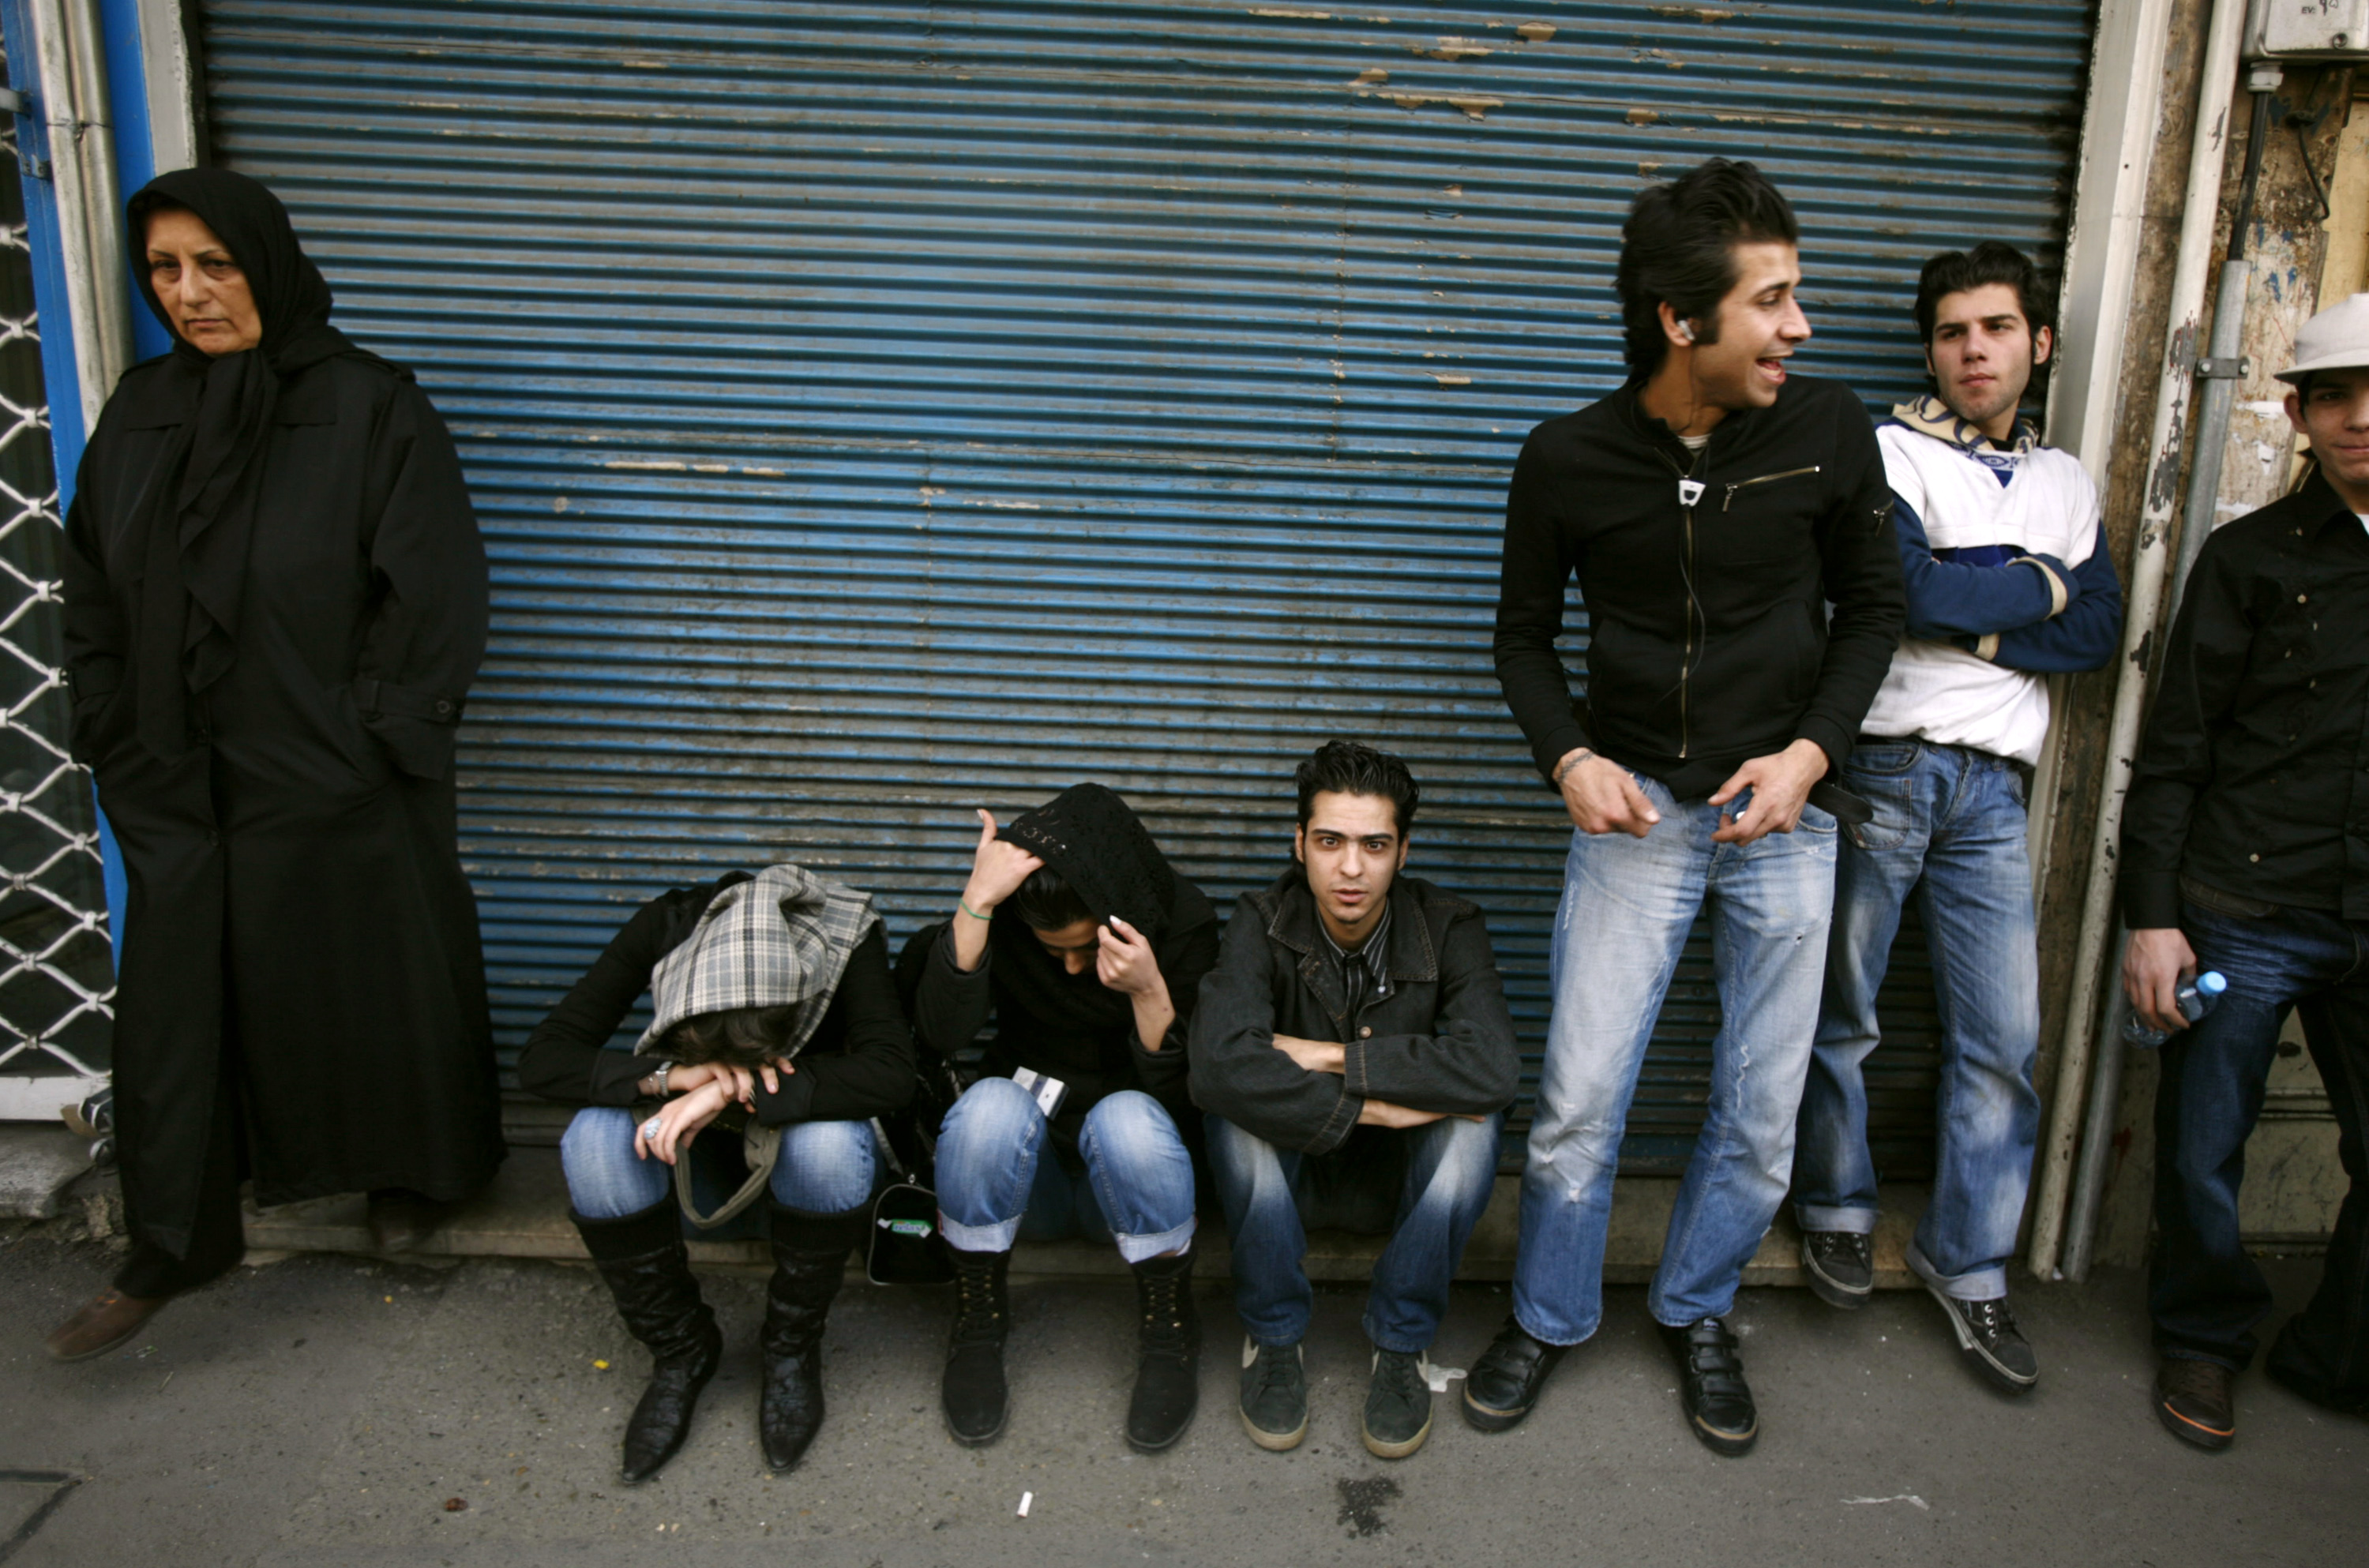 Yes, Iranians Wear Jeans: Pitfalls Of Public Diplomacy With Iran